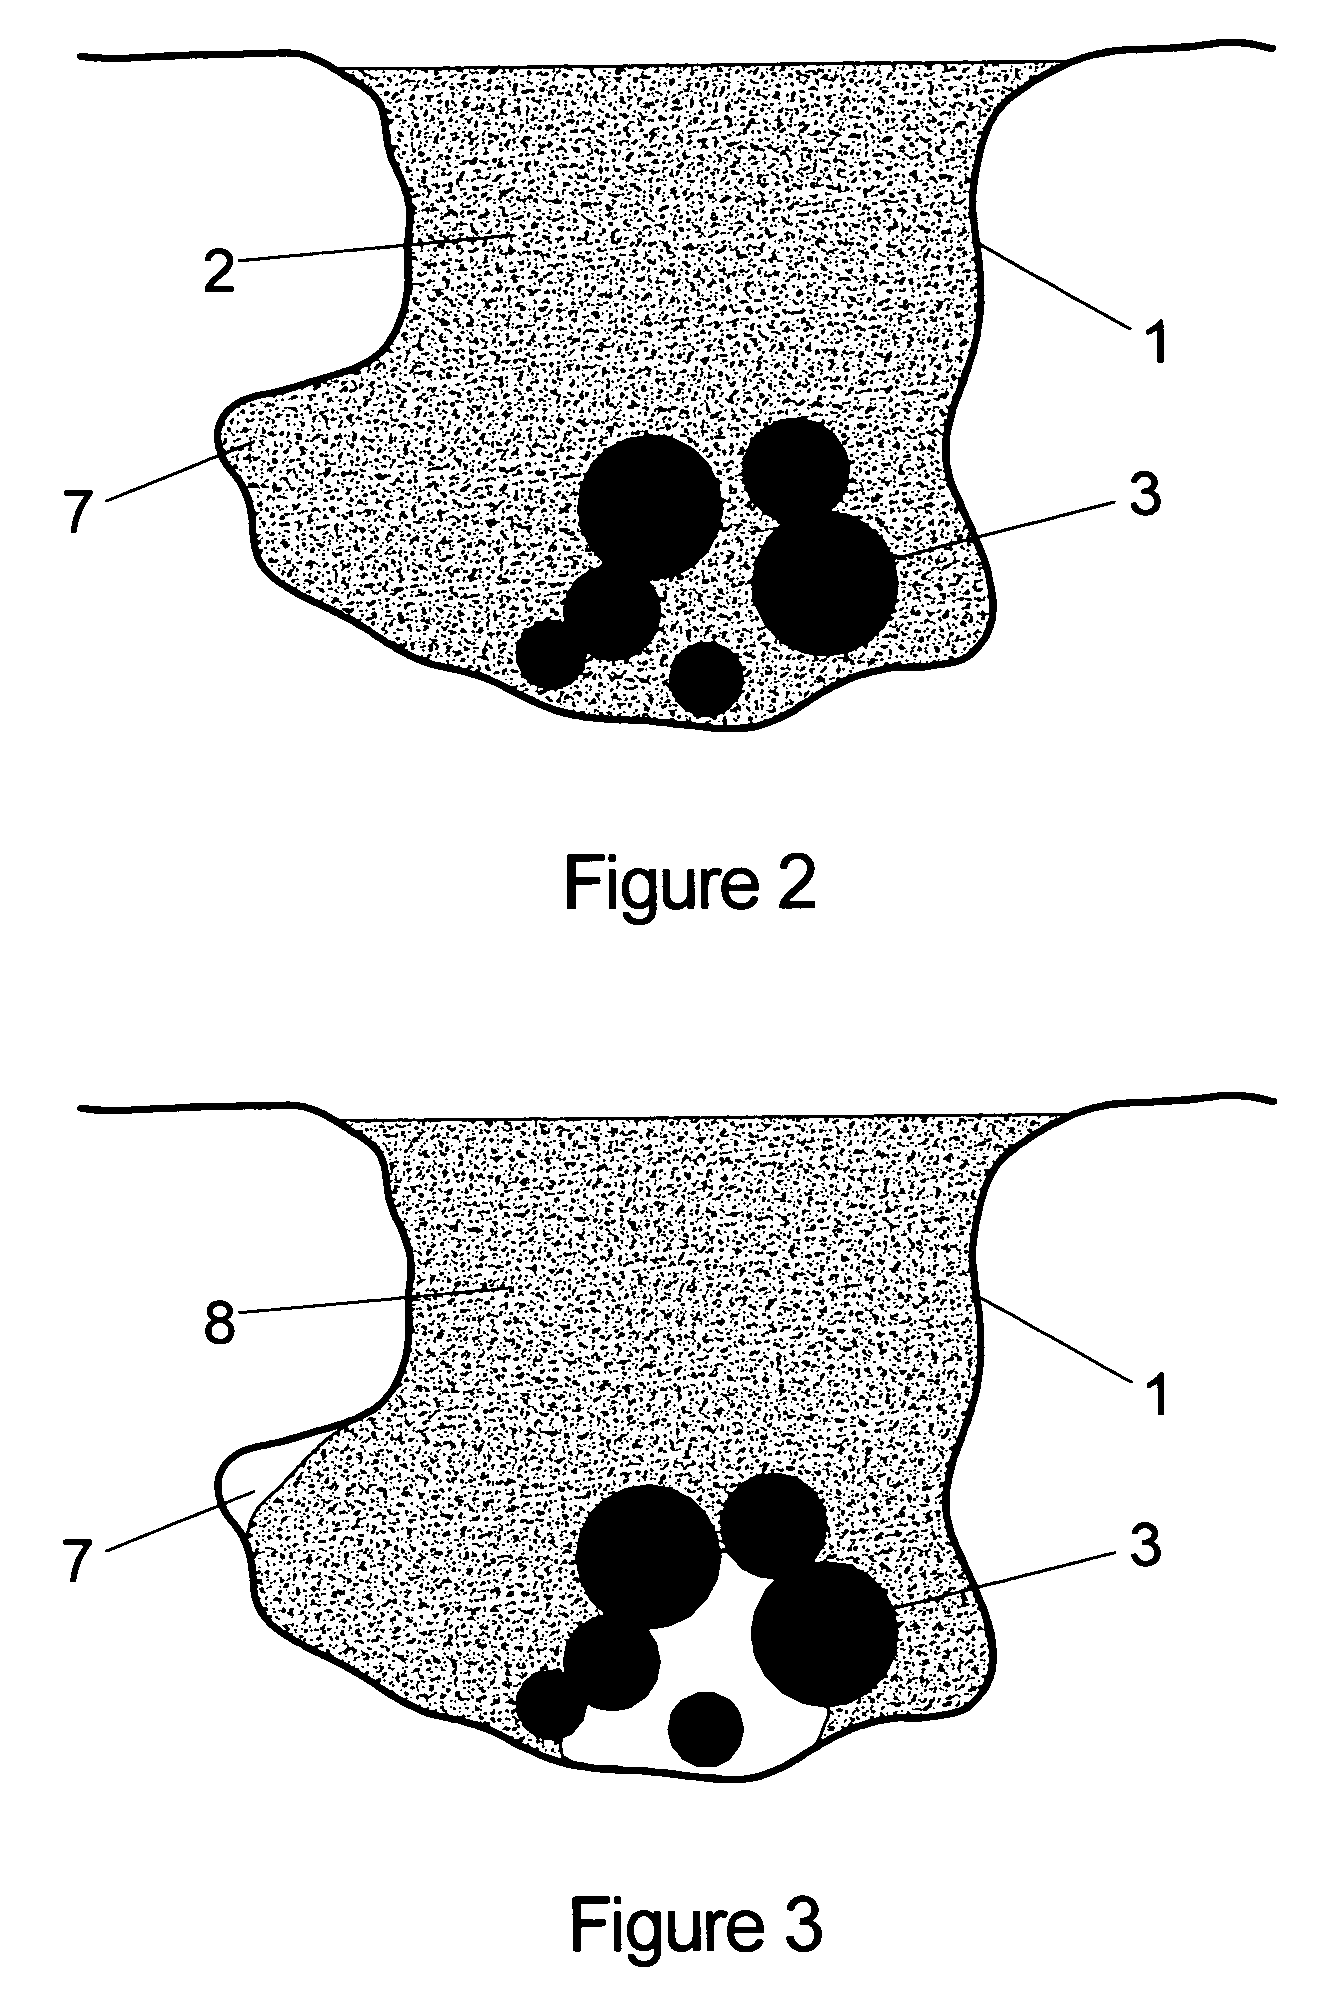 Flowable fill and flowable fill method for disposal of recovered waste